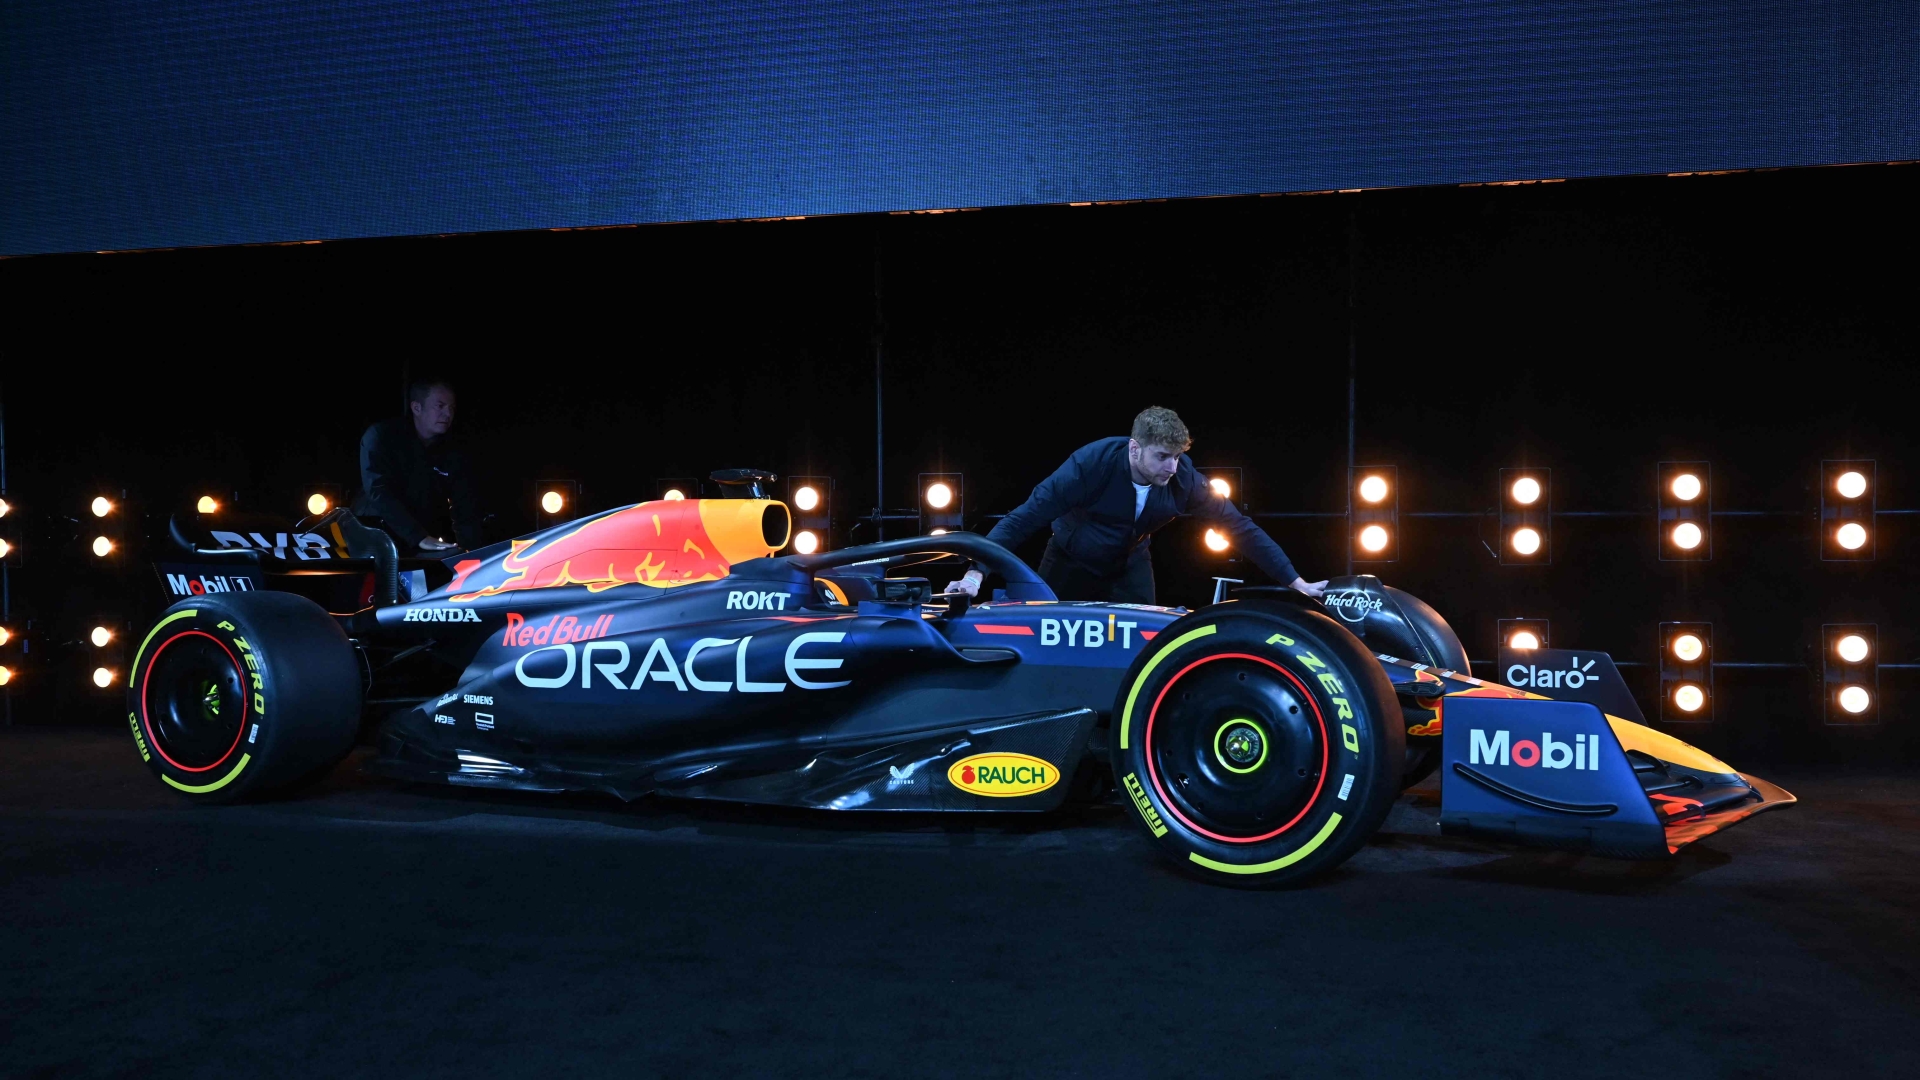 Specsavers joins fans in brutally trolling Red Bull as F1 champions reveal Max Verstappen's new car for 2023 season. The US Sun